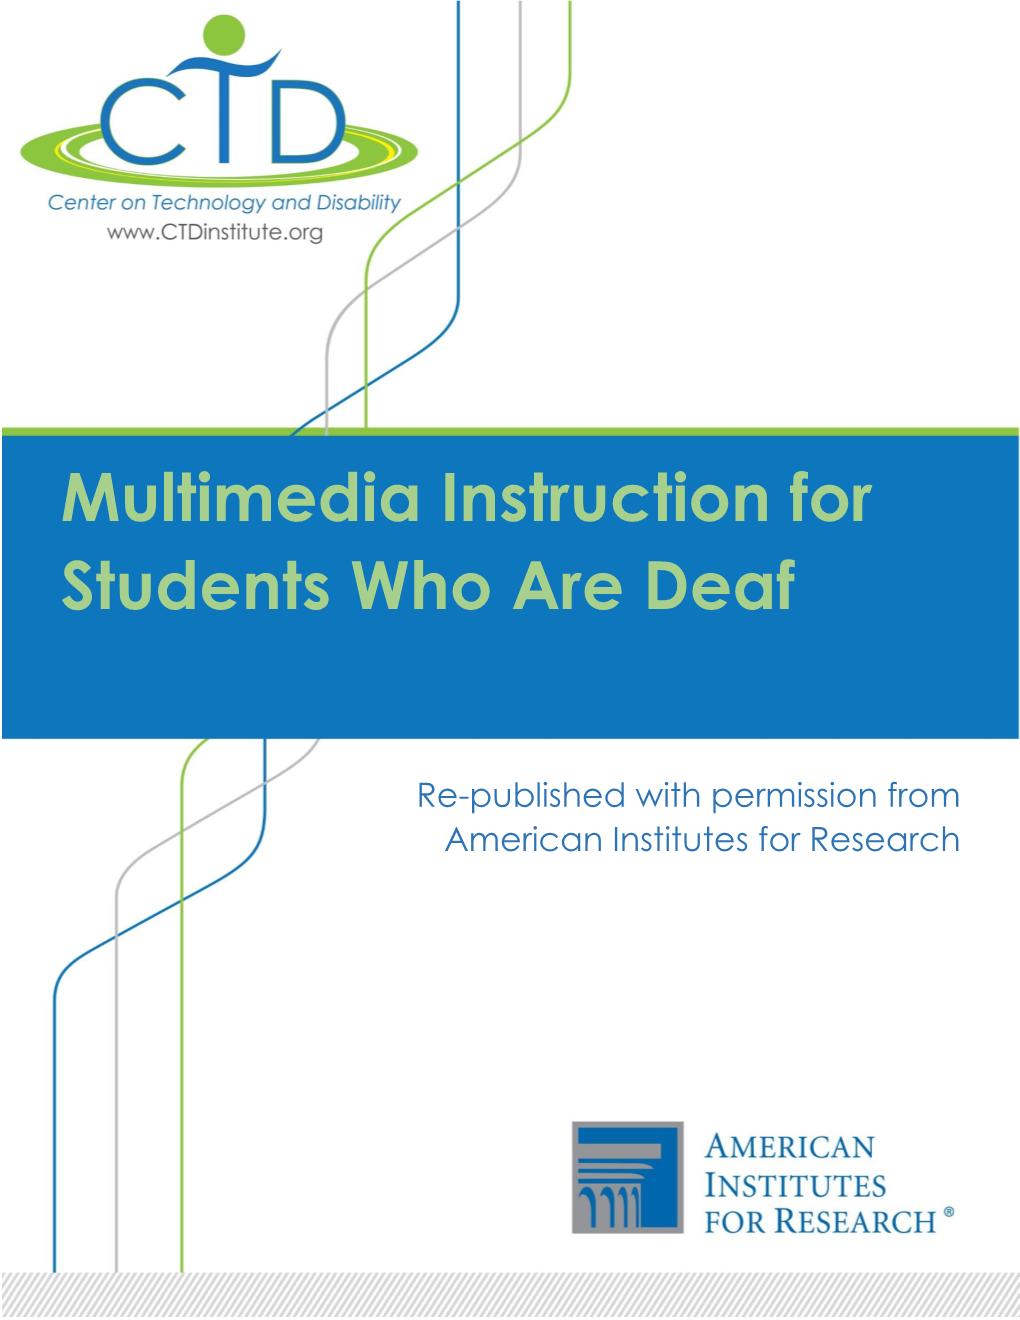 Multimedia Instruction for Students Who Are Deaf